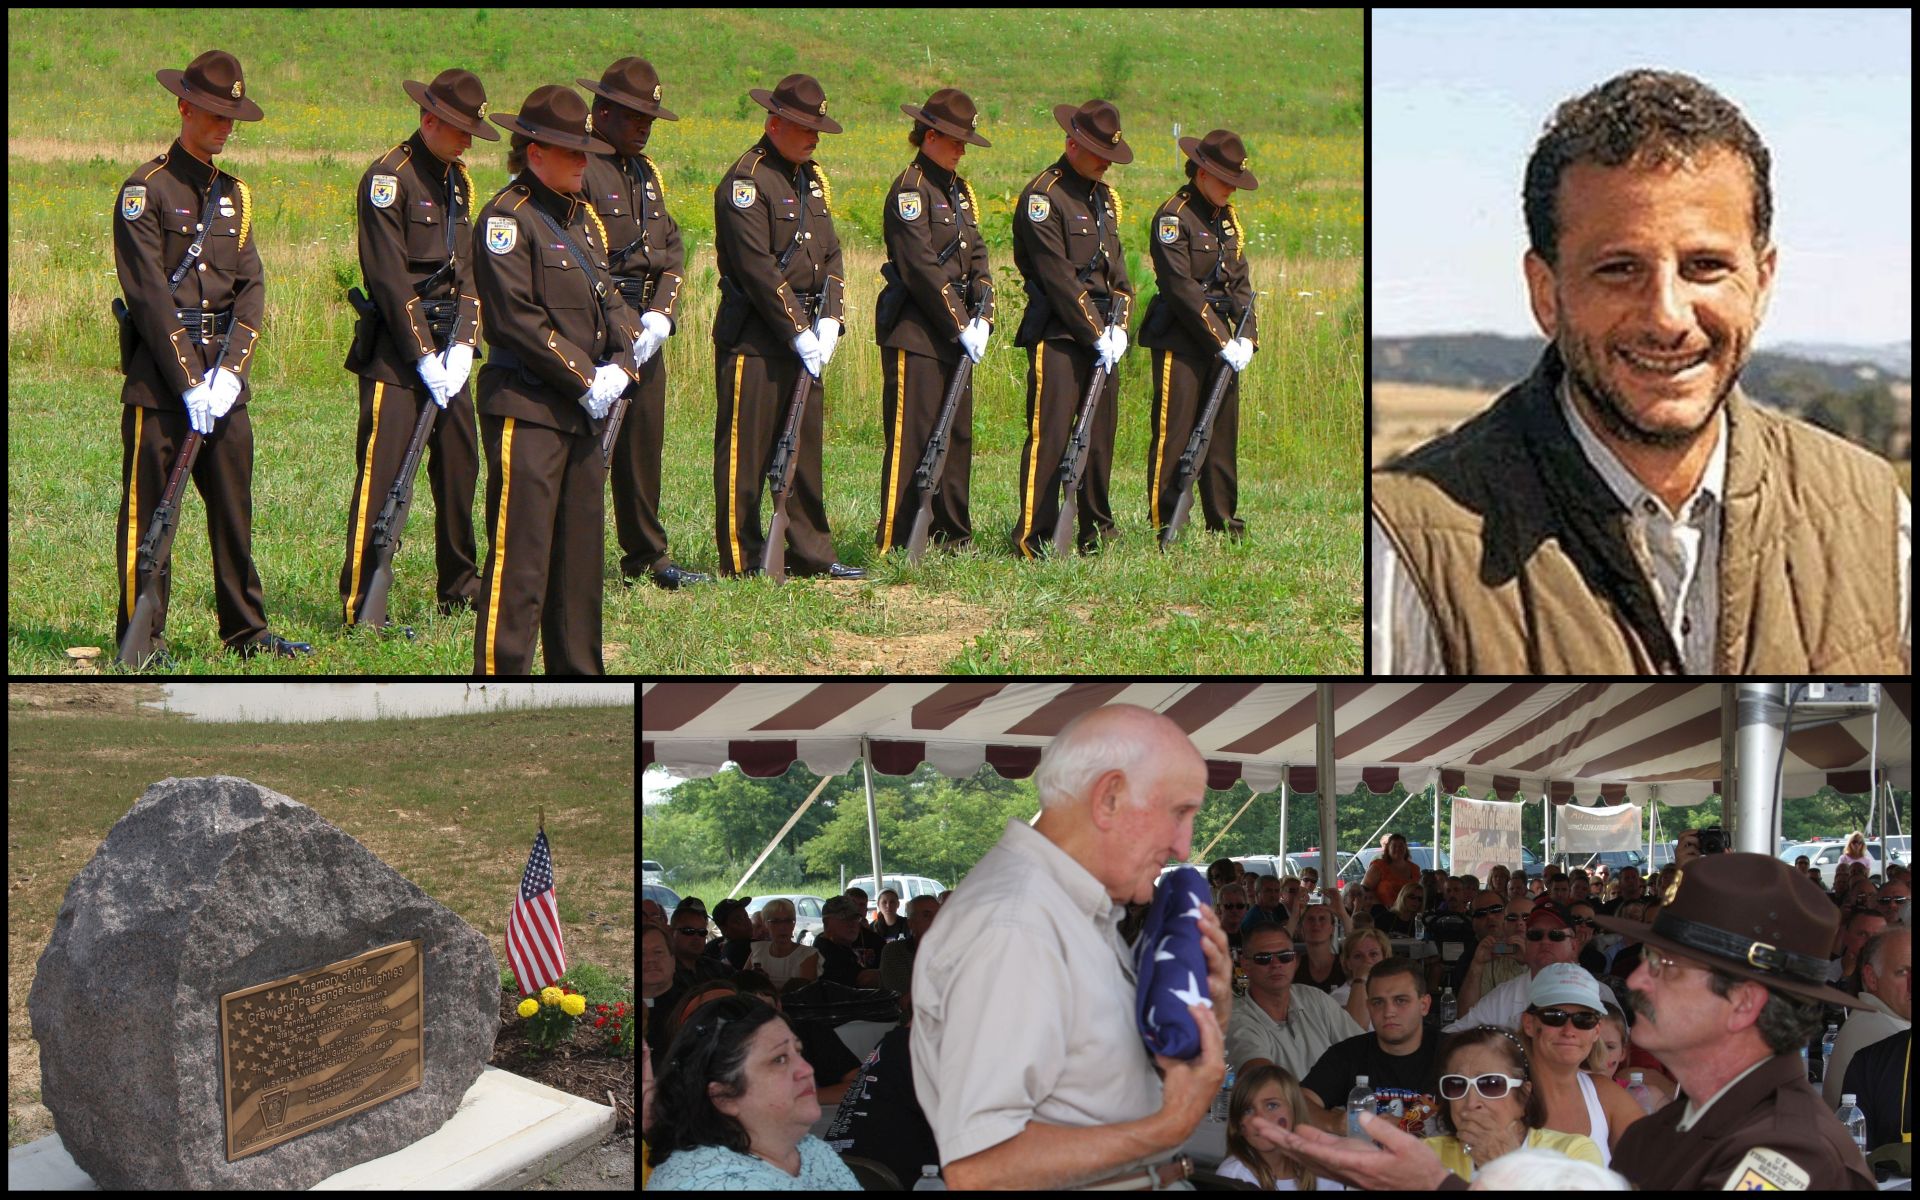 A Richard Guadagno portrait and three images from the Pennsylvania State Game Lands 93 dedication ceremony: Honor Guard members bowing in respect, a plaque to the fallen passengers, a flag presentation ceremony